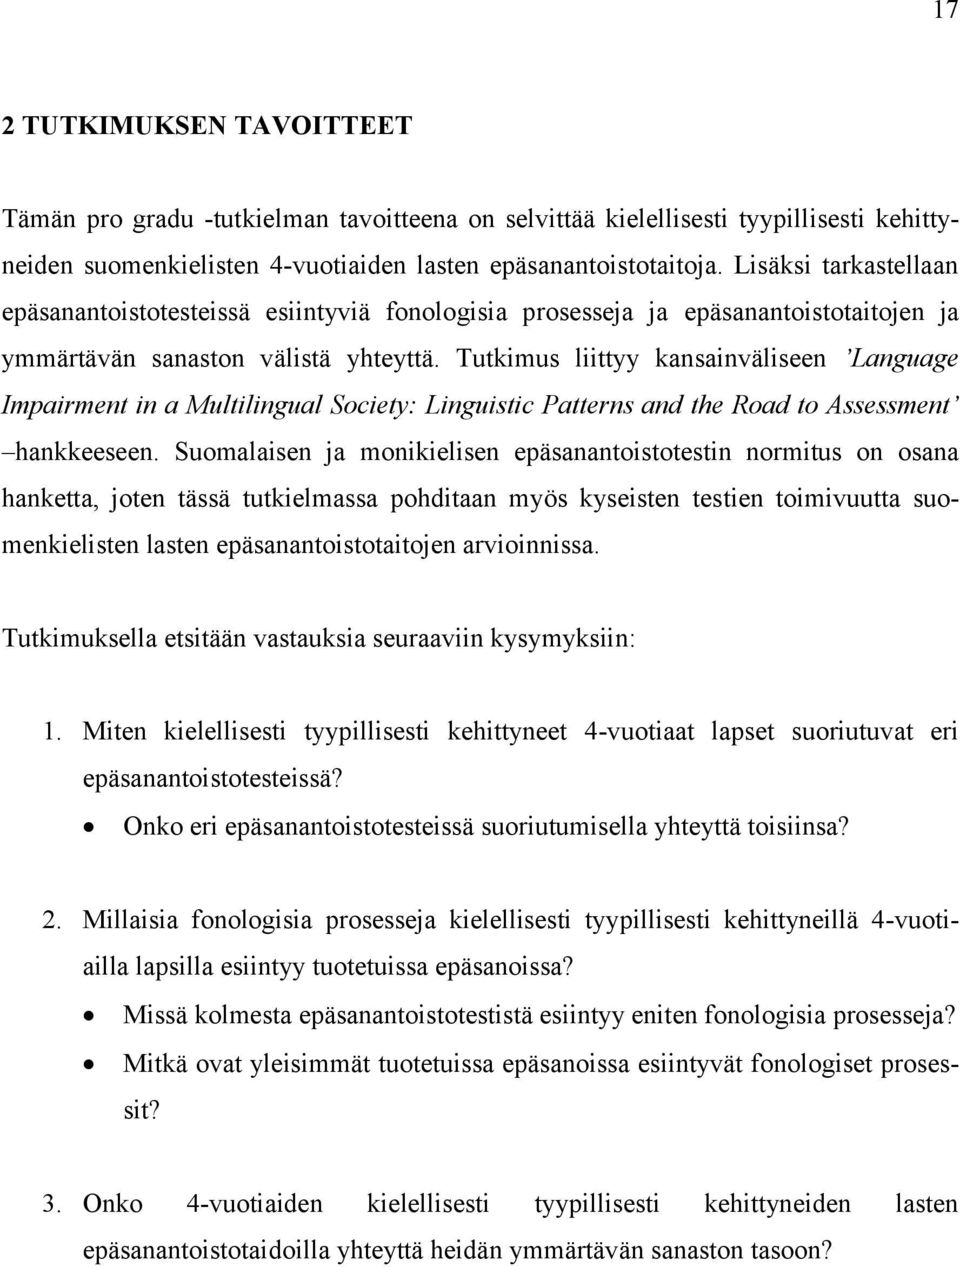 Tutkimus liittyy kansainväliseen Language Impairment in a Multilingual Society: Linguistic Patterns and the Road to Assessment hankkeeseen.